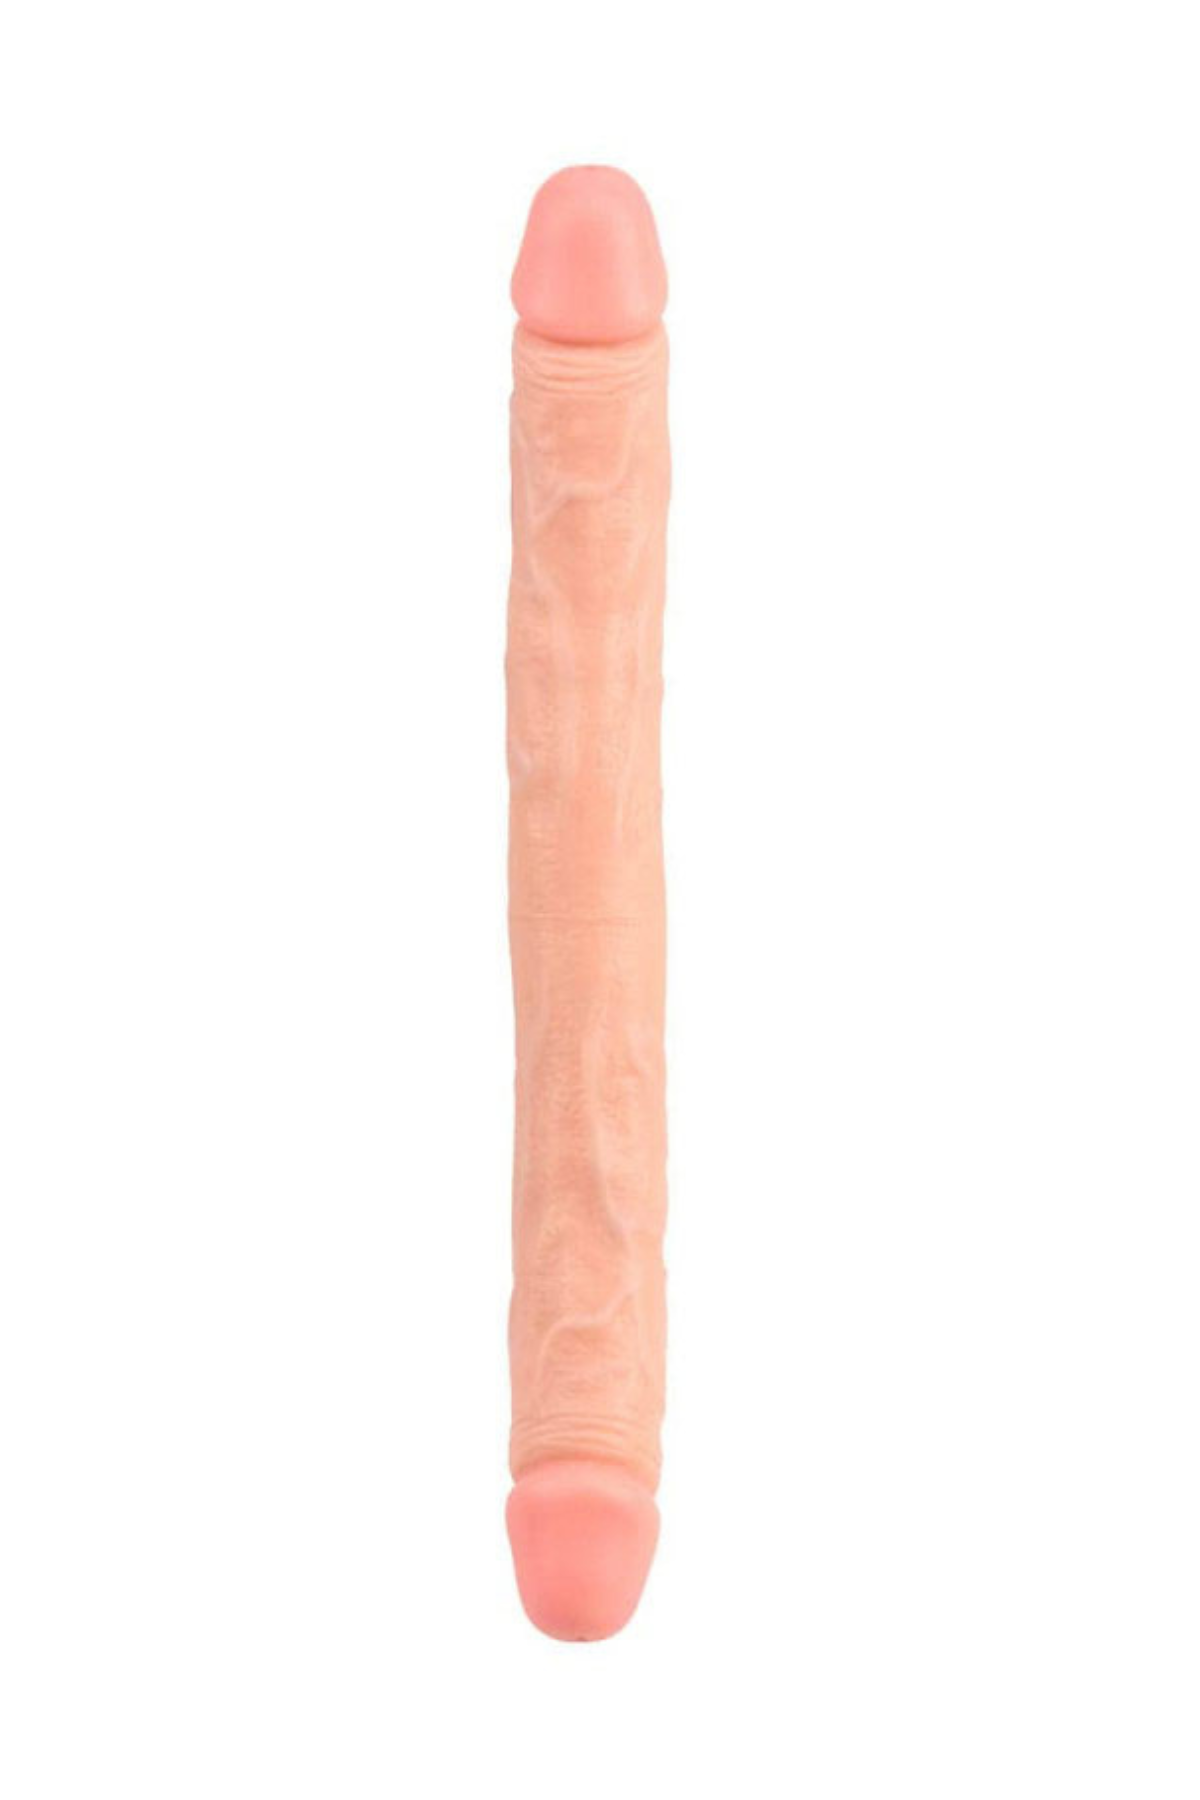 Knock-Knock Double-ended Dildo Size